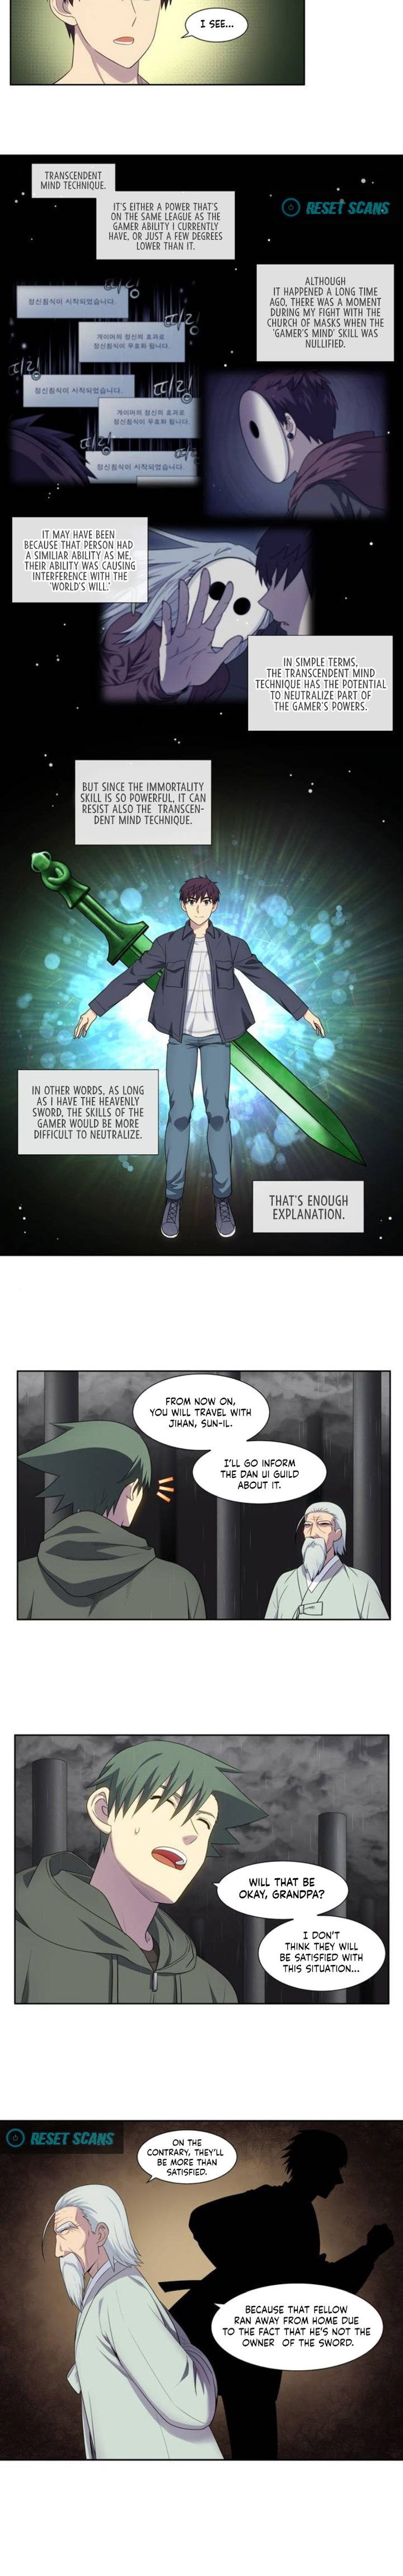 the-gamer-chap-380-5